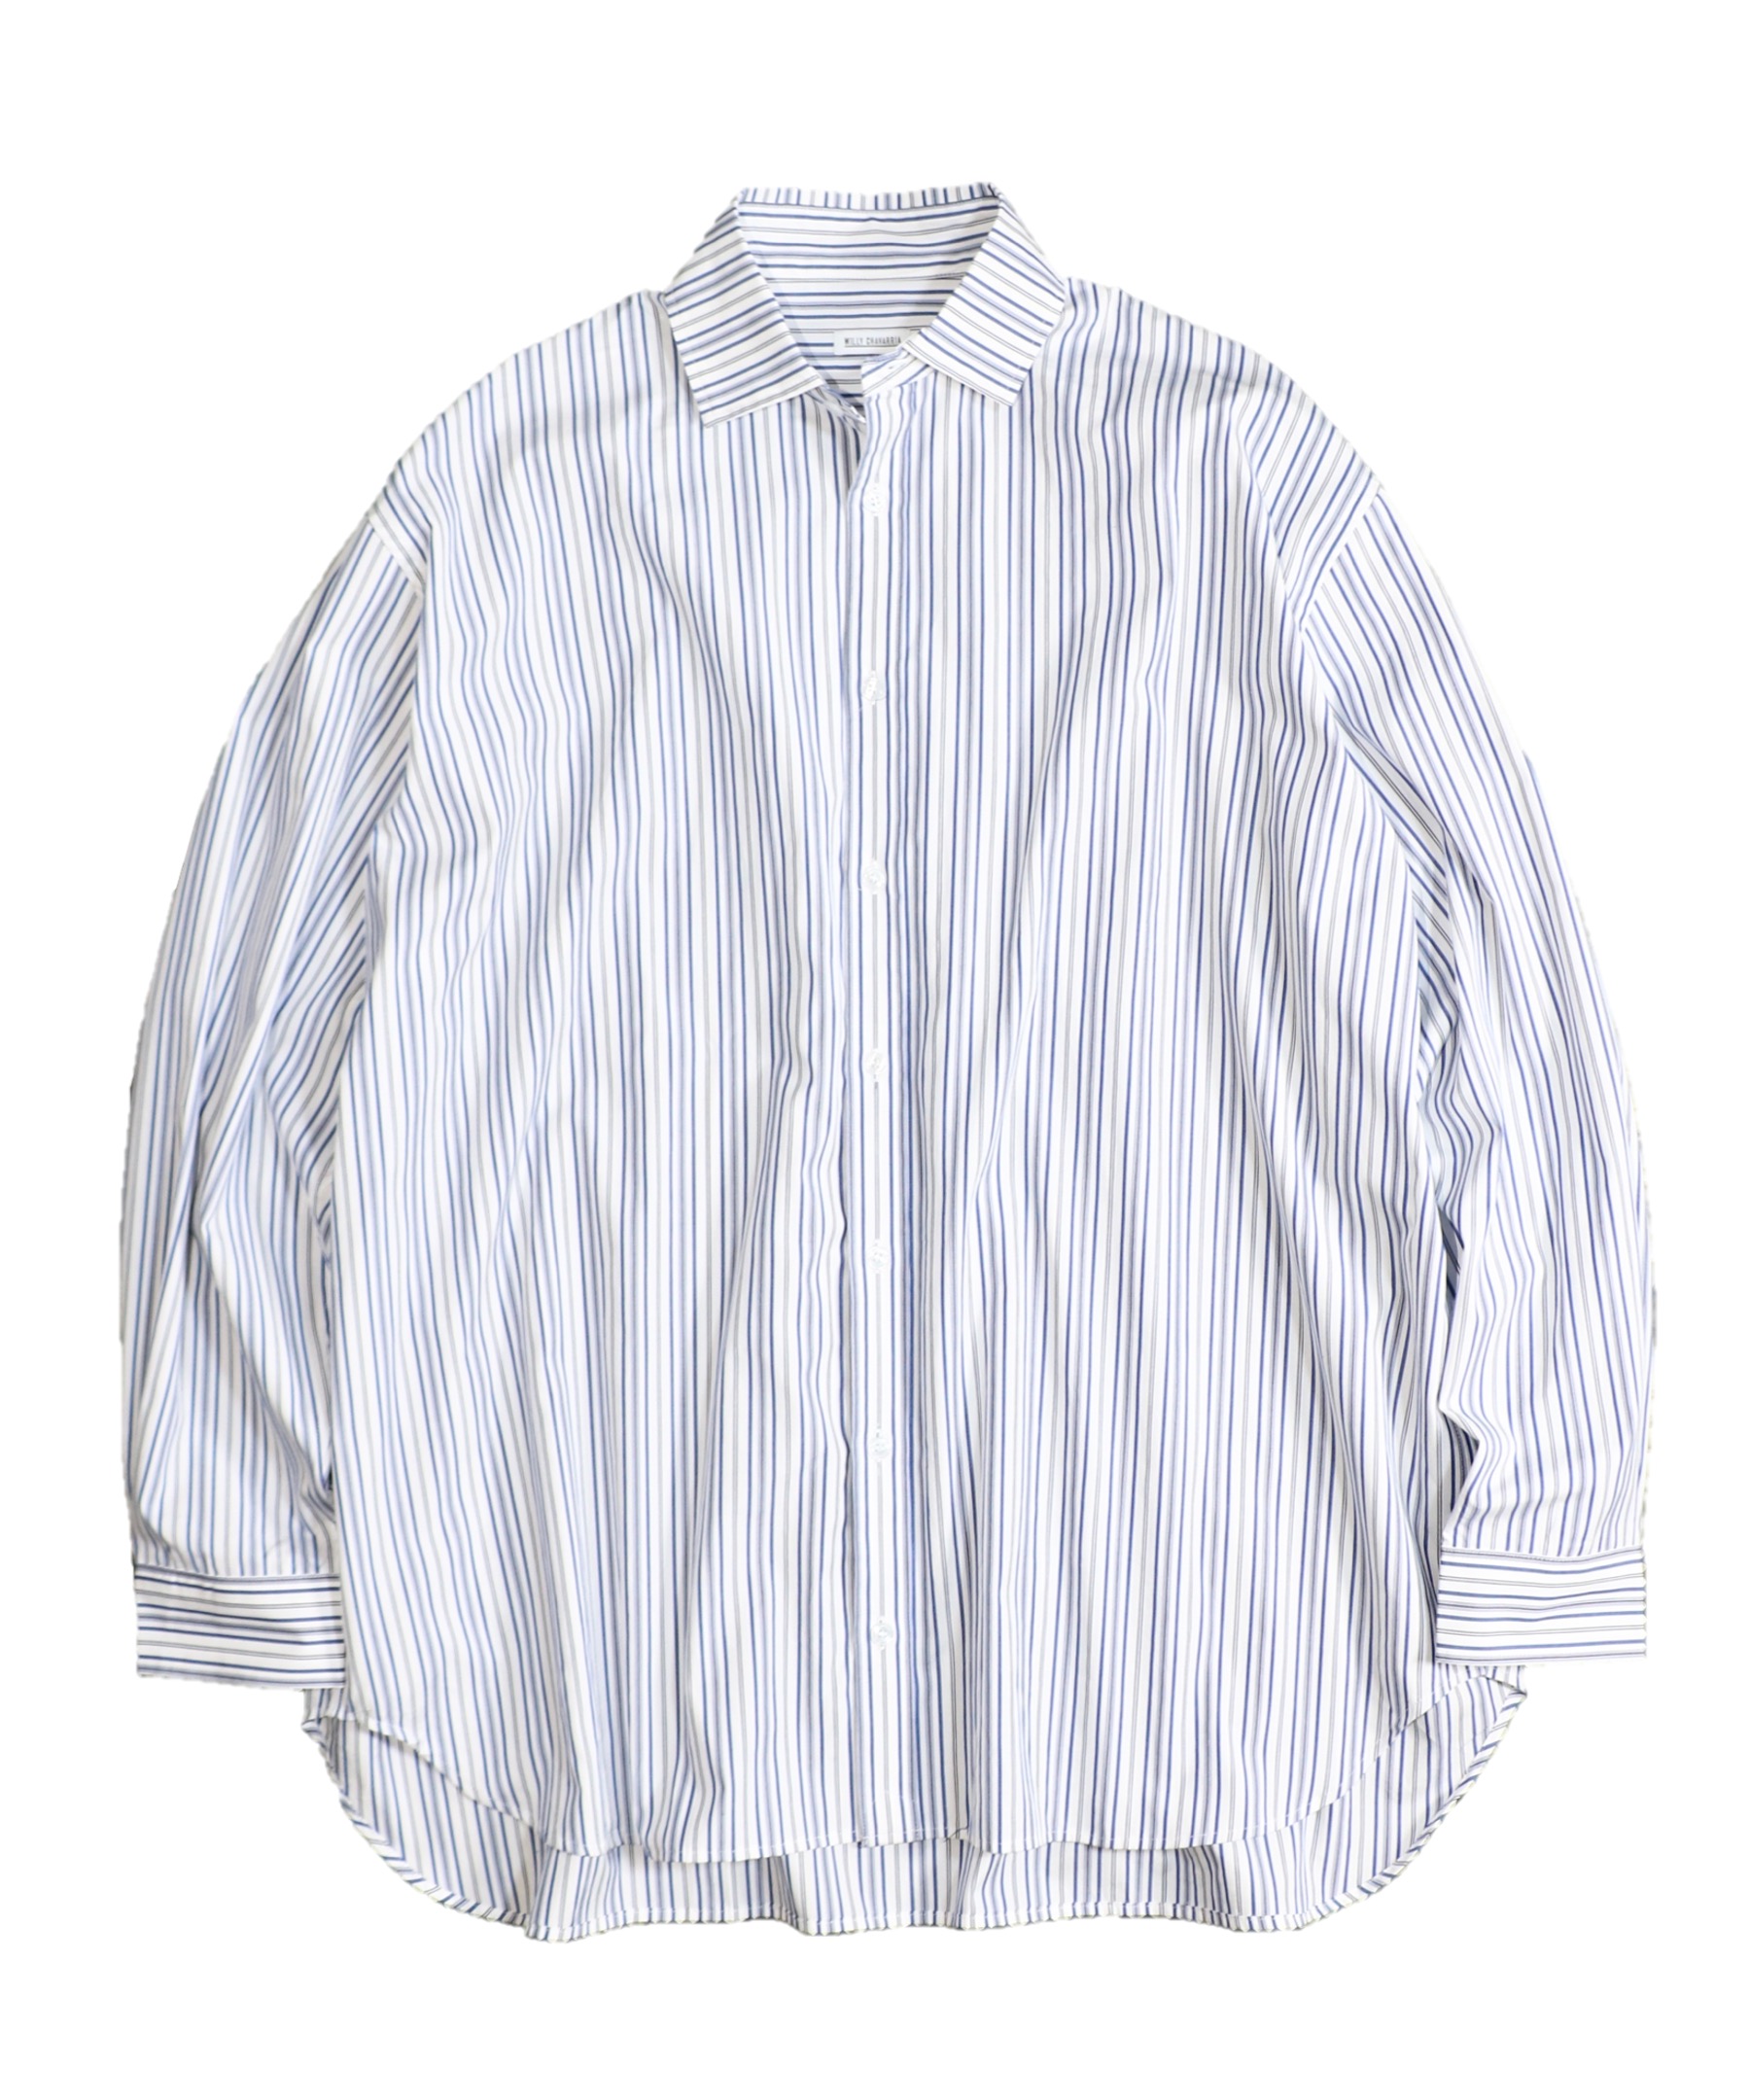 WILLY CHAVARRIA / BIG WILLY DRESS SHIRTS. – C.E.L.STORE NOTE